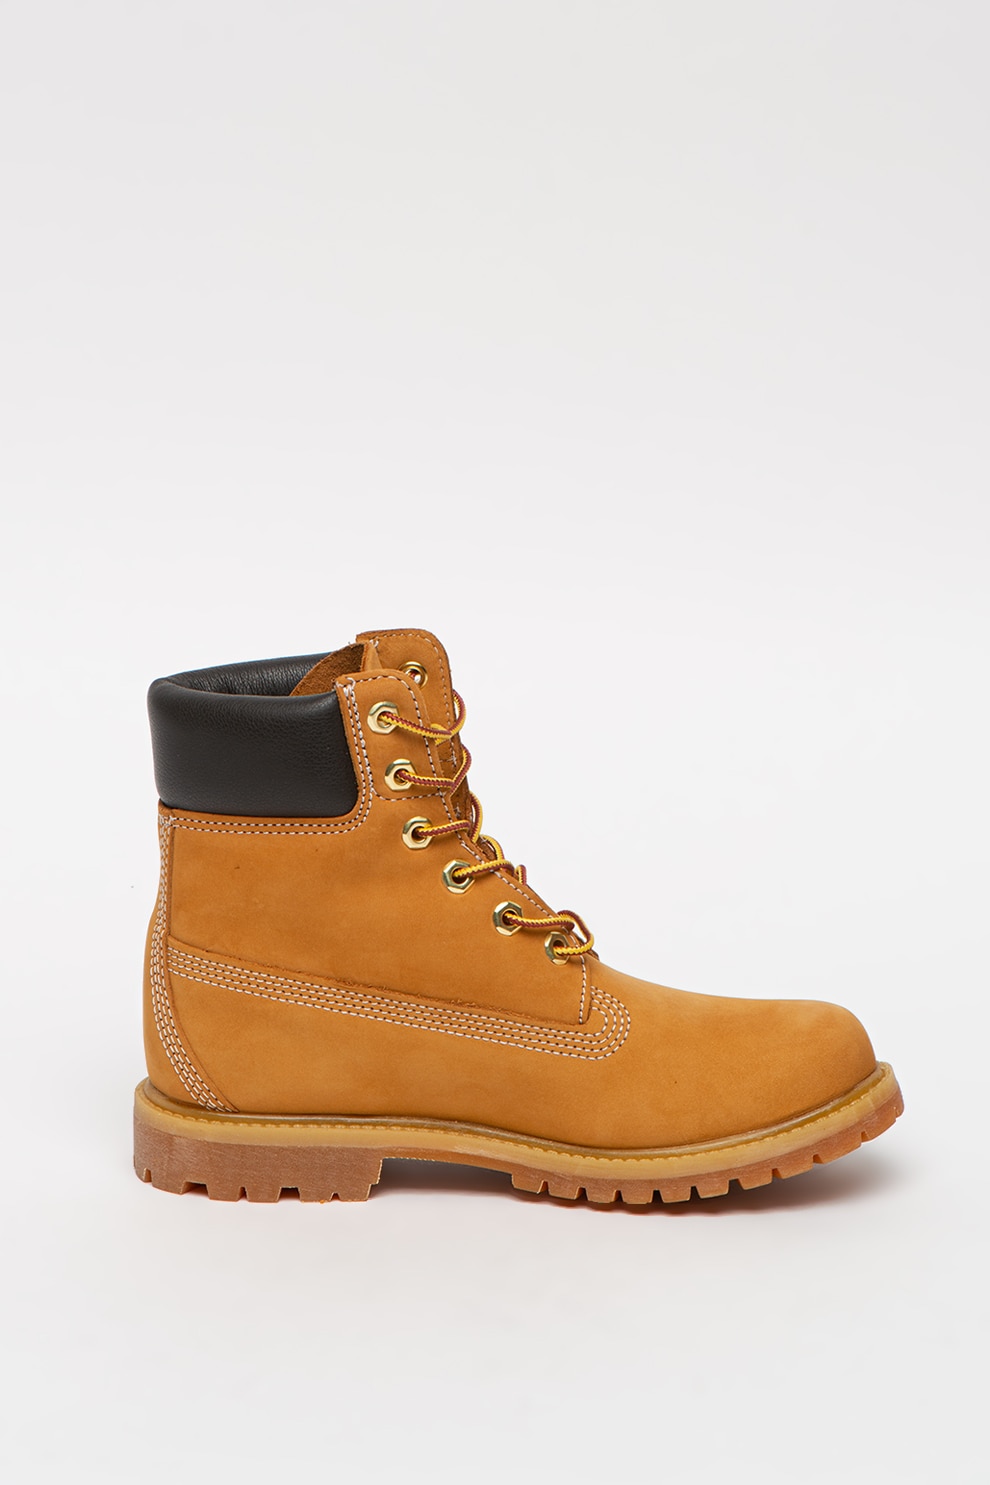 timberland boots 6in premium